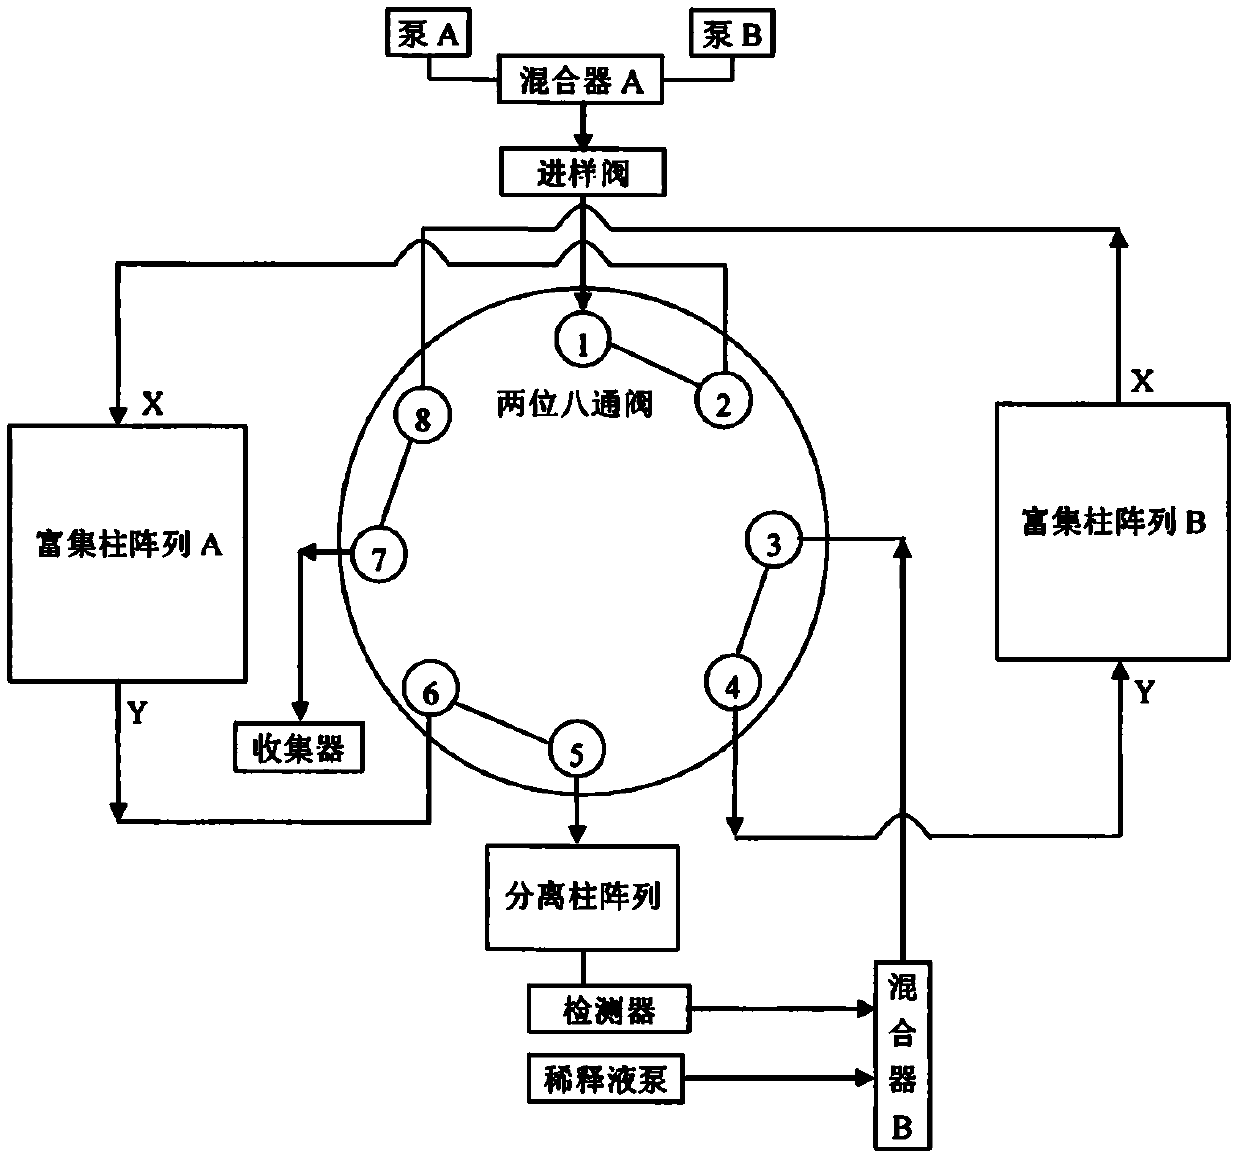 Multi-dimensional liquid chromatography separation system based on two-position eight-way valve